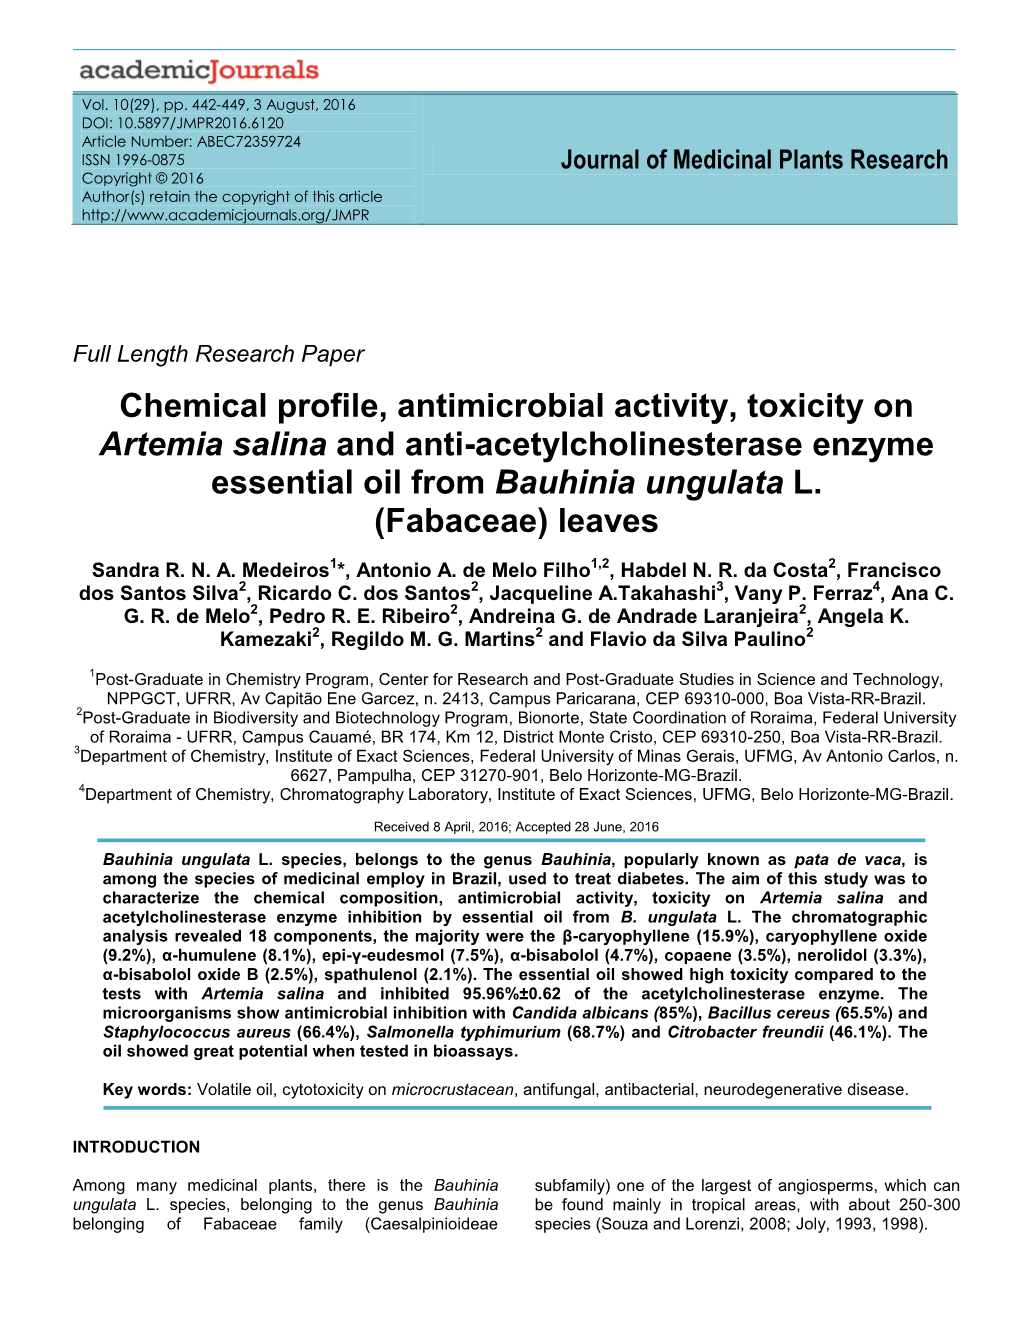 Chemical Profile, Antimicrobial Activity, Toxicity on Artemia Salina and Anti-Acetylcholinesterase Enzyme Essential Oil from Bauhinia Ungulata L